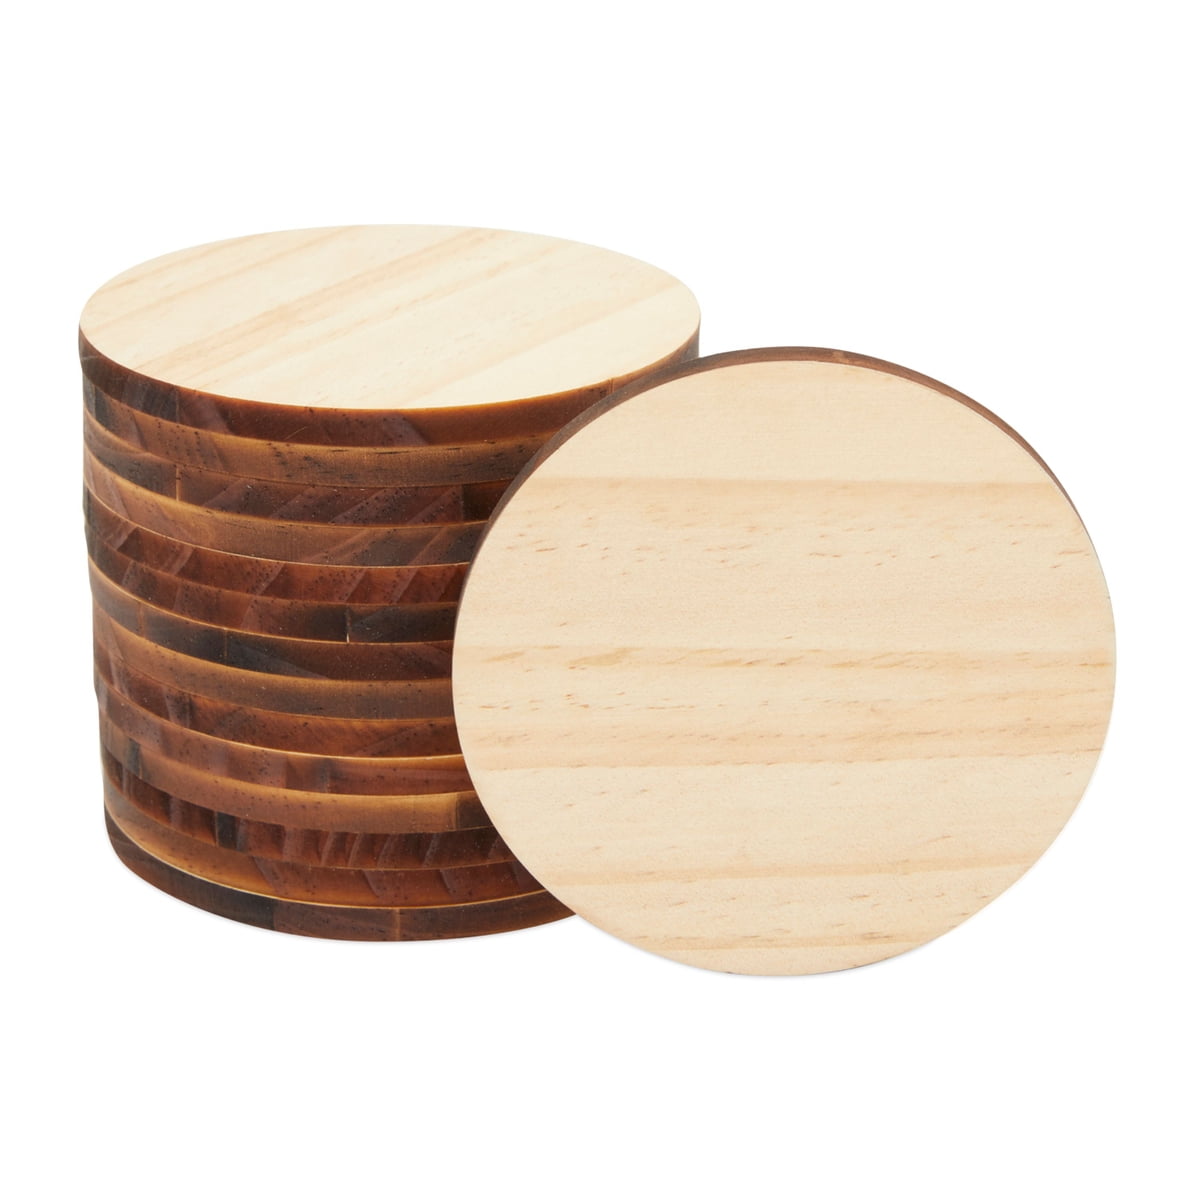 60 Pack 4 Inch Wood Circles for Crafts Unfinished Wood Rounds Wooden Cutouts for Crafts Wood Burning Blank Wood Slices for Coasters Home Decor Wooden Circles for Kids Painting 